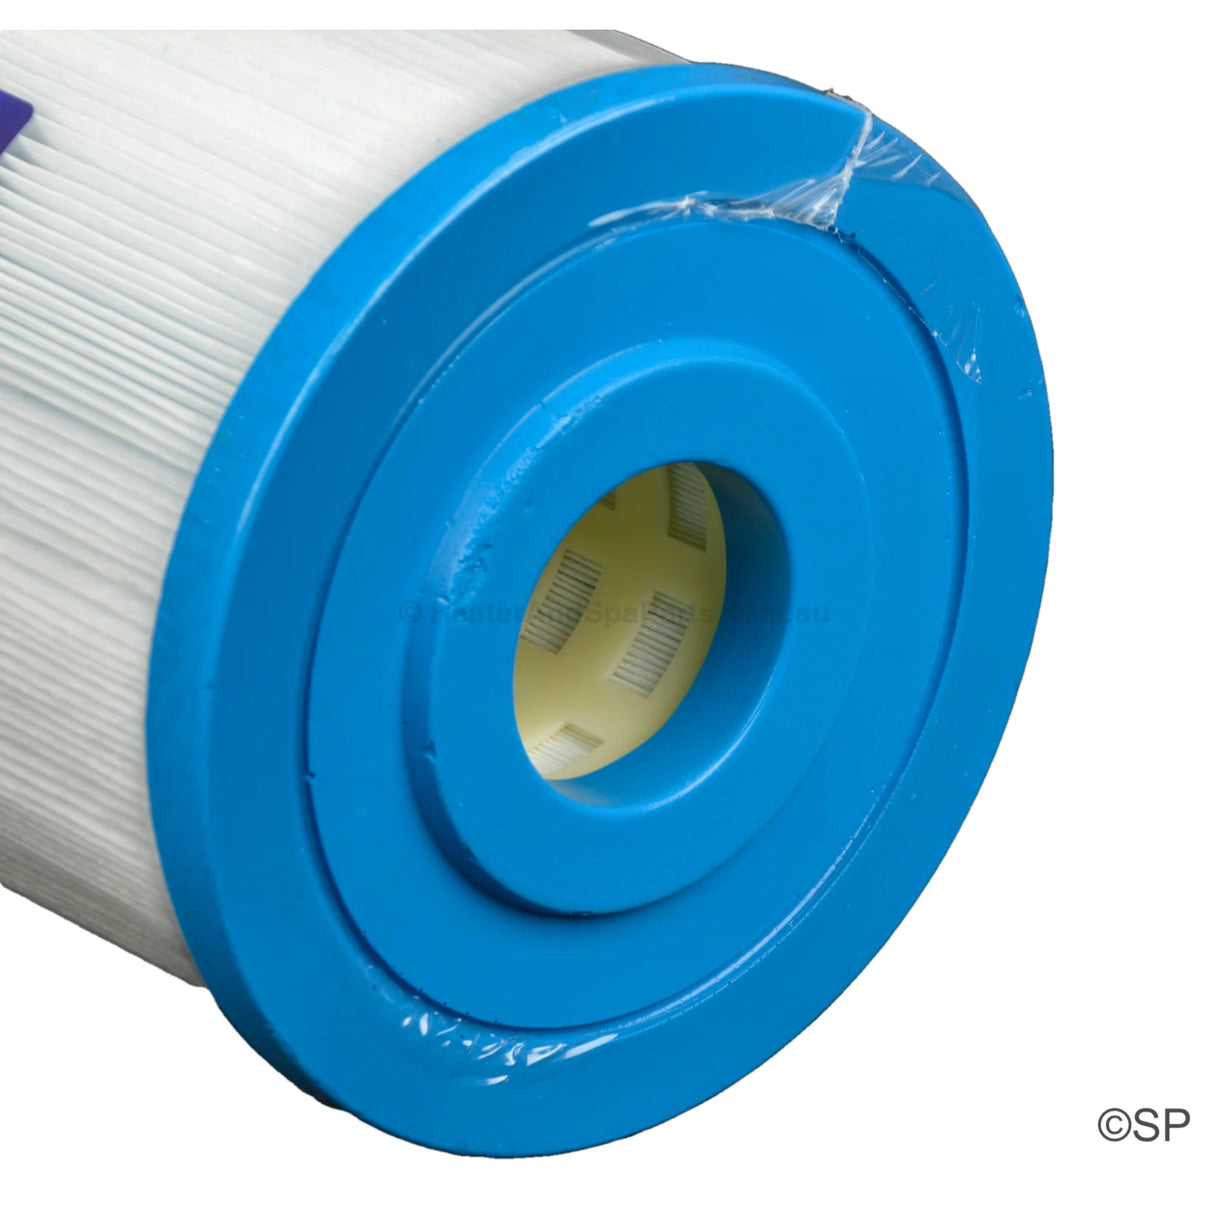 265mm x 150mm Endless Spas / Hot Spring C30 Cartridge Filter - 100ft² Also Spa Systems - 50ft² - Heater and Spa Parts